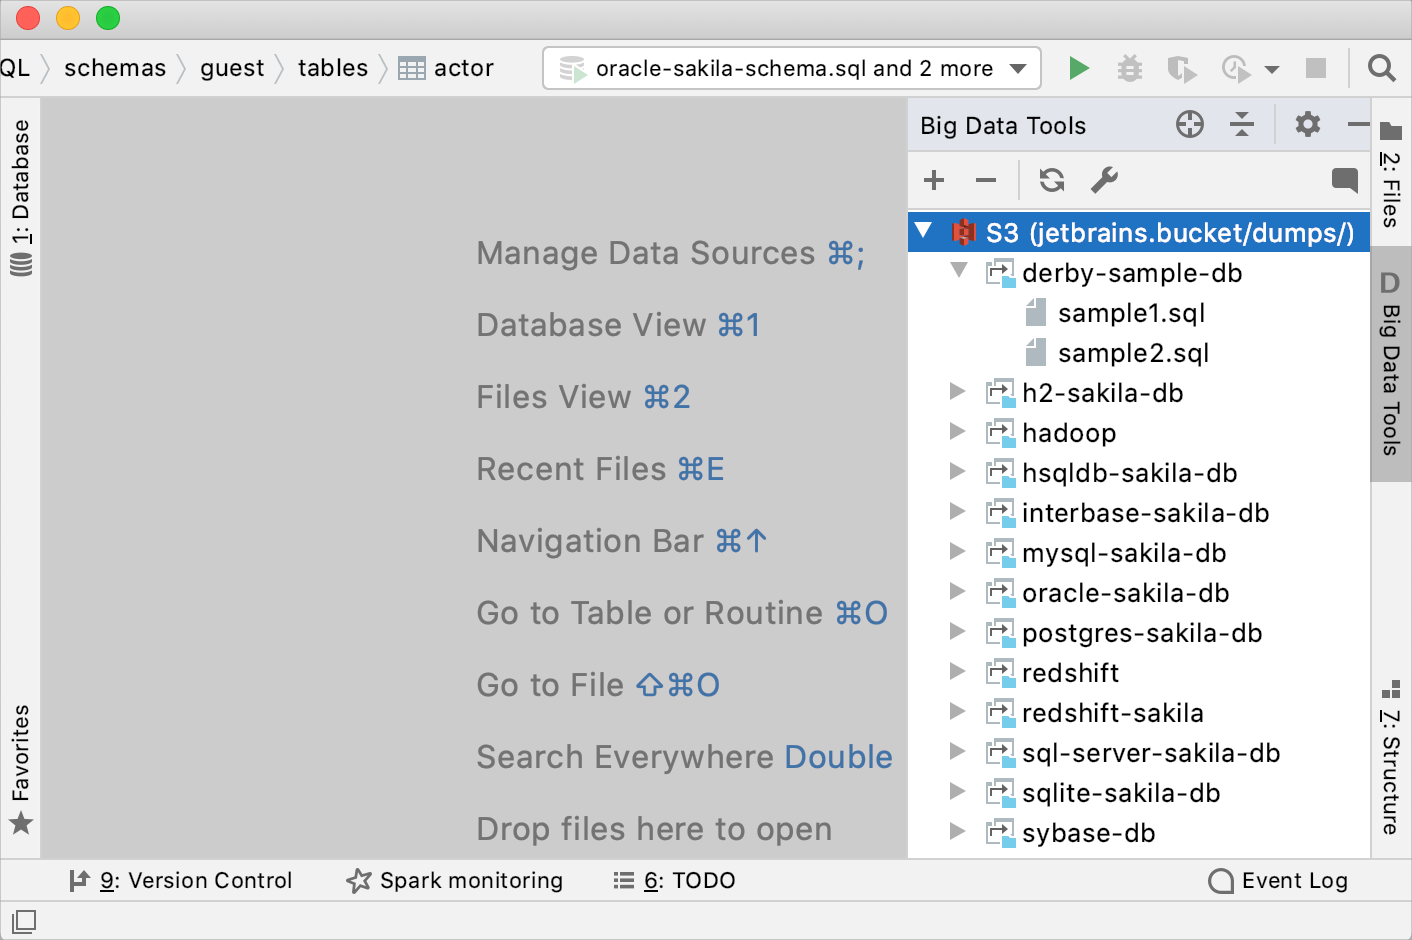 The view of DataGrip after the Big Data Tools plugin is installed